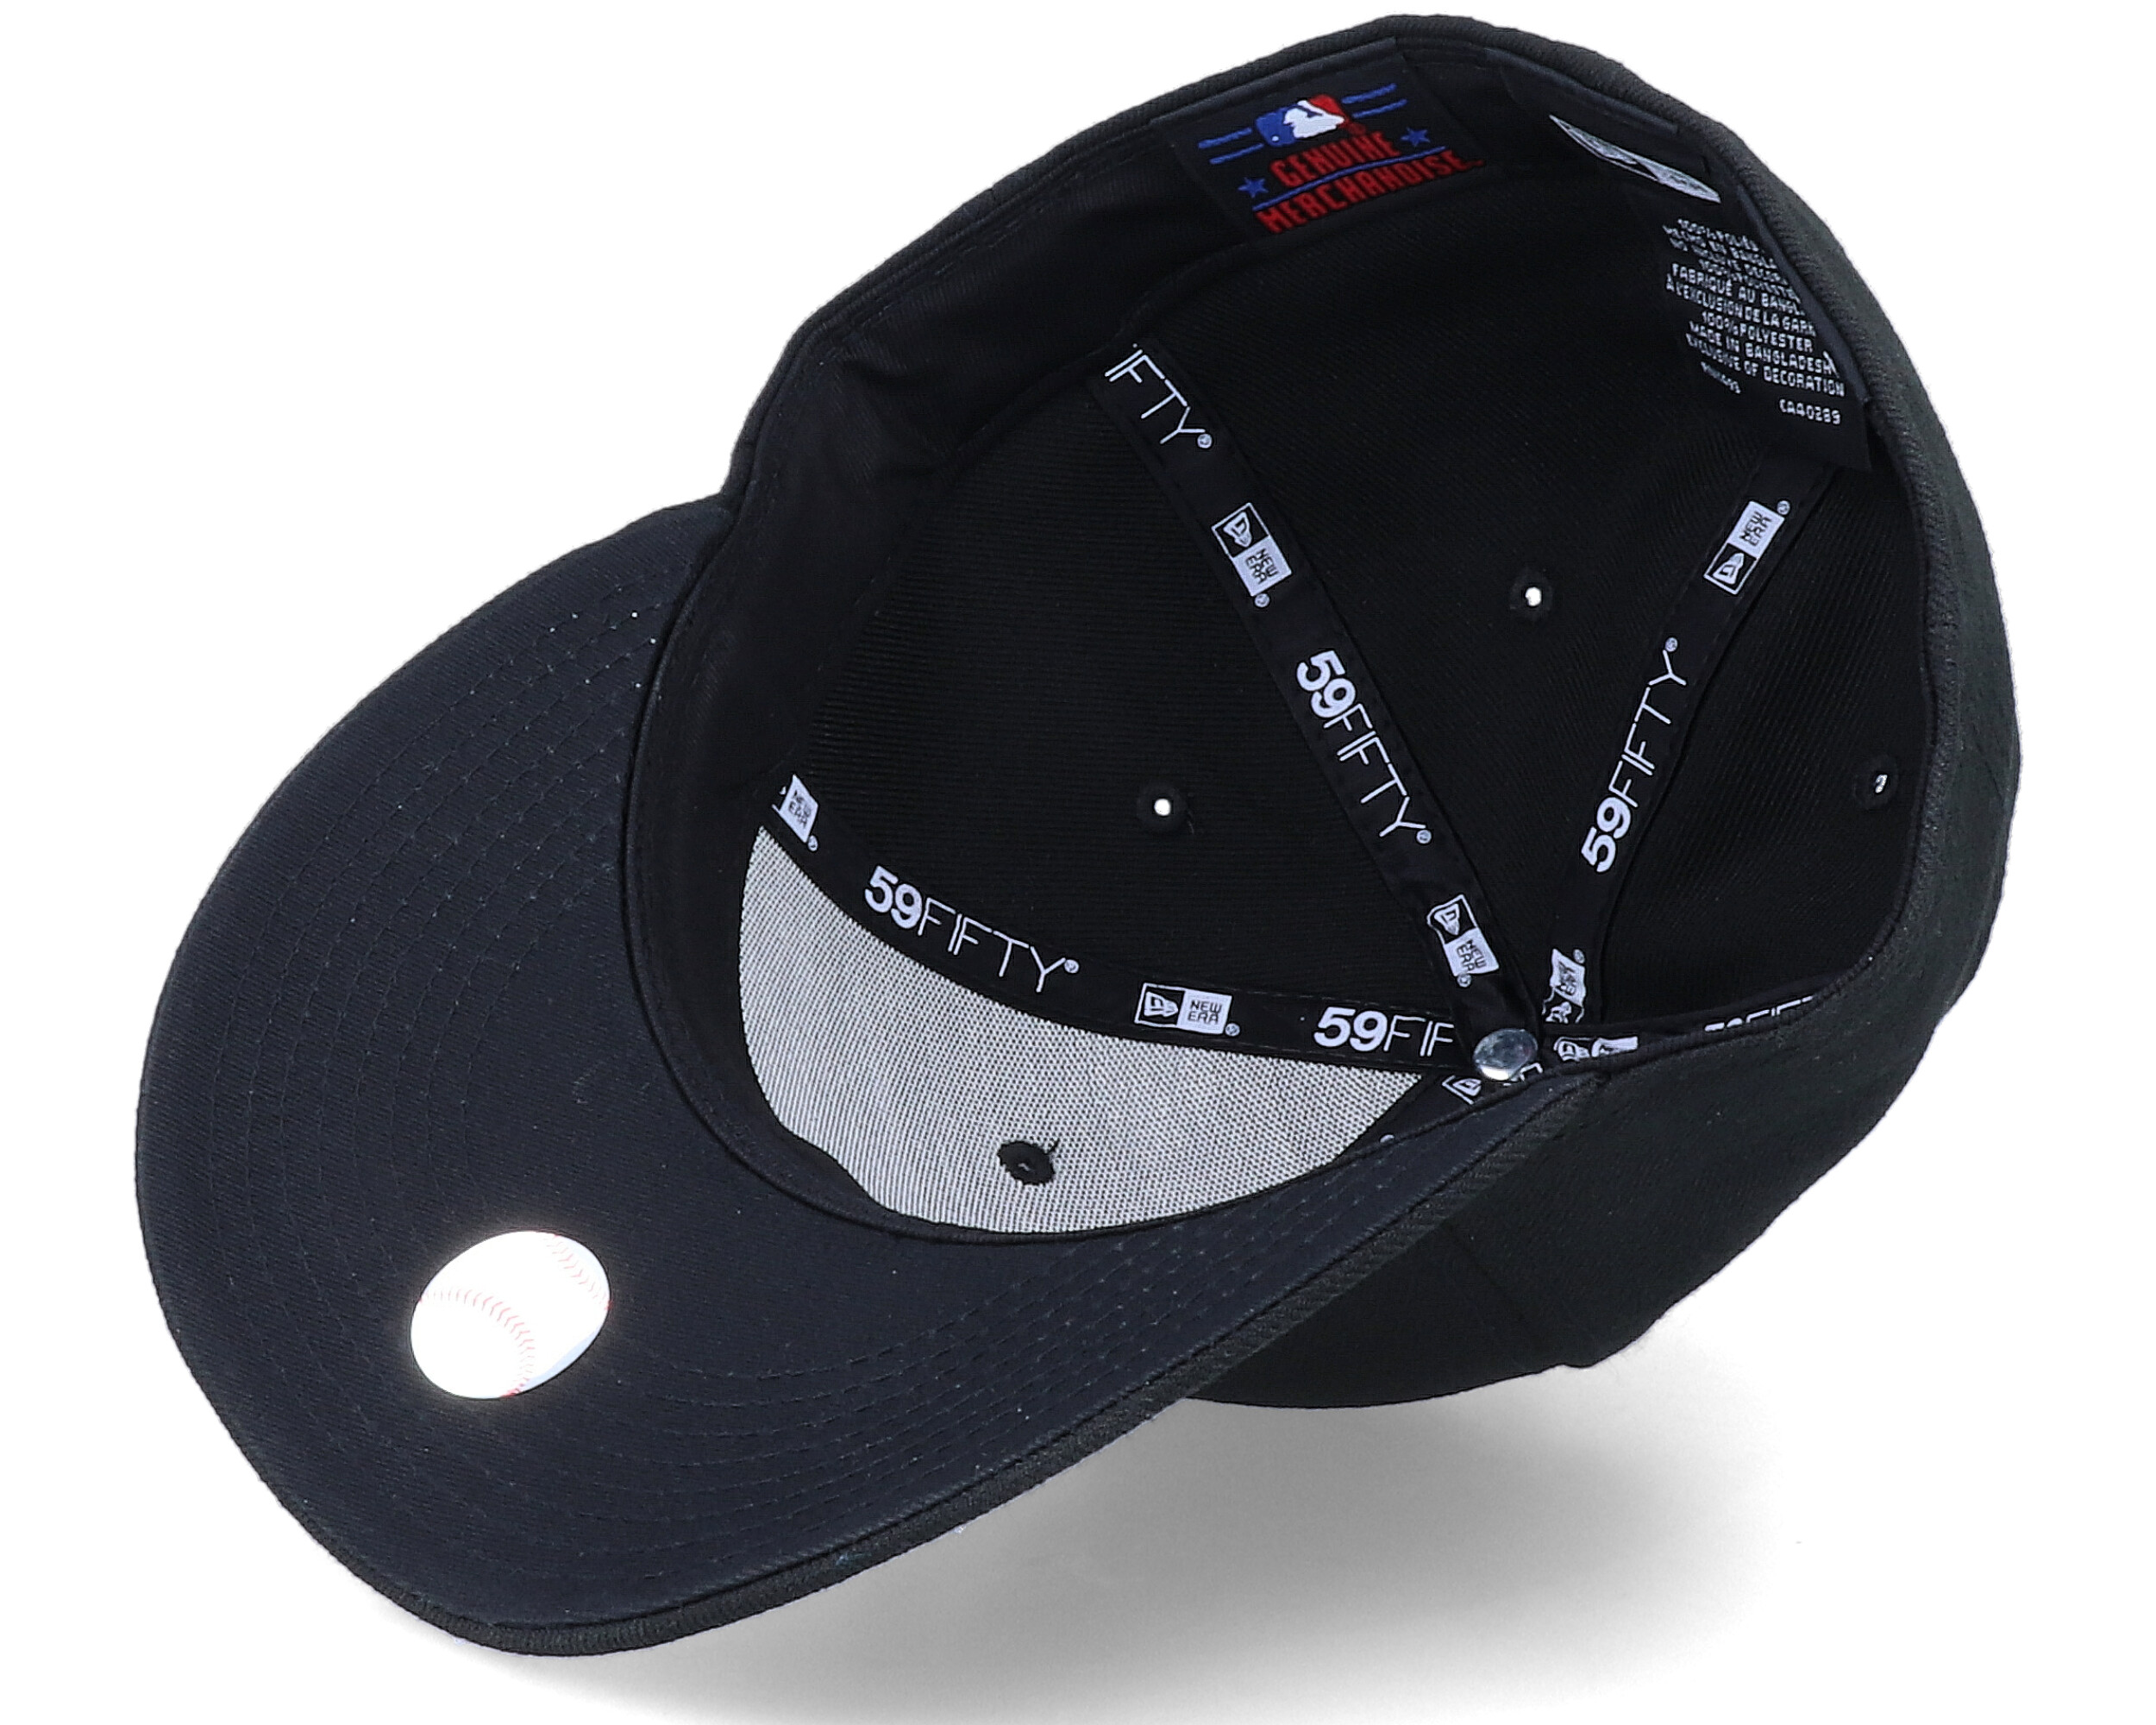 New York Yankees Low Profile 59Fifty Black/White Fitted - New Era caps